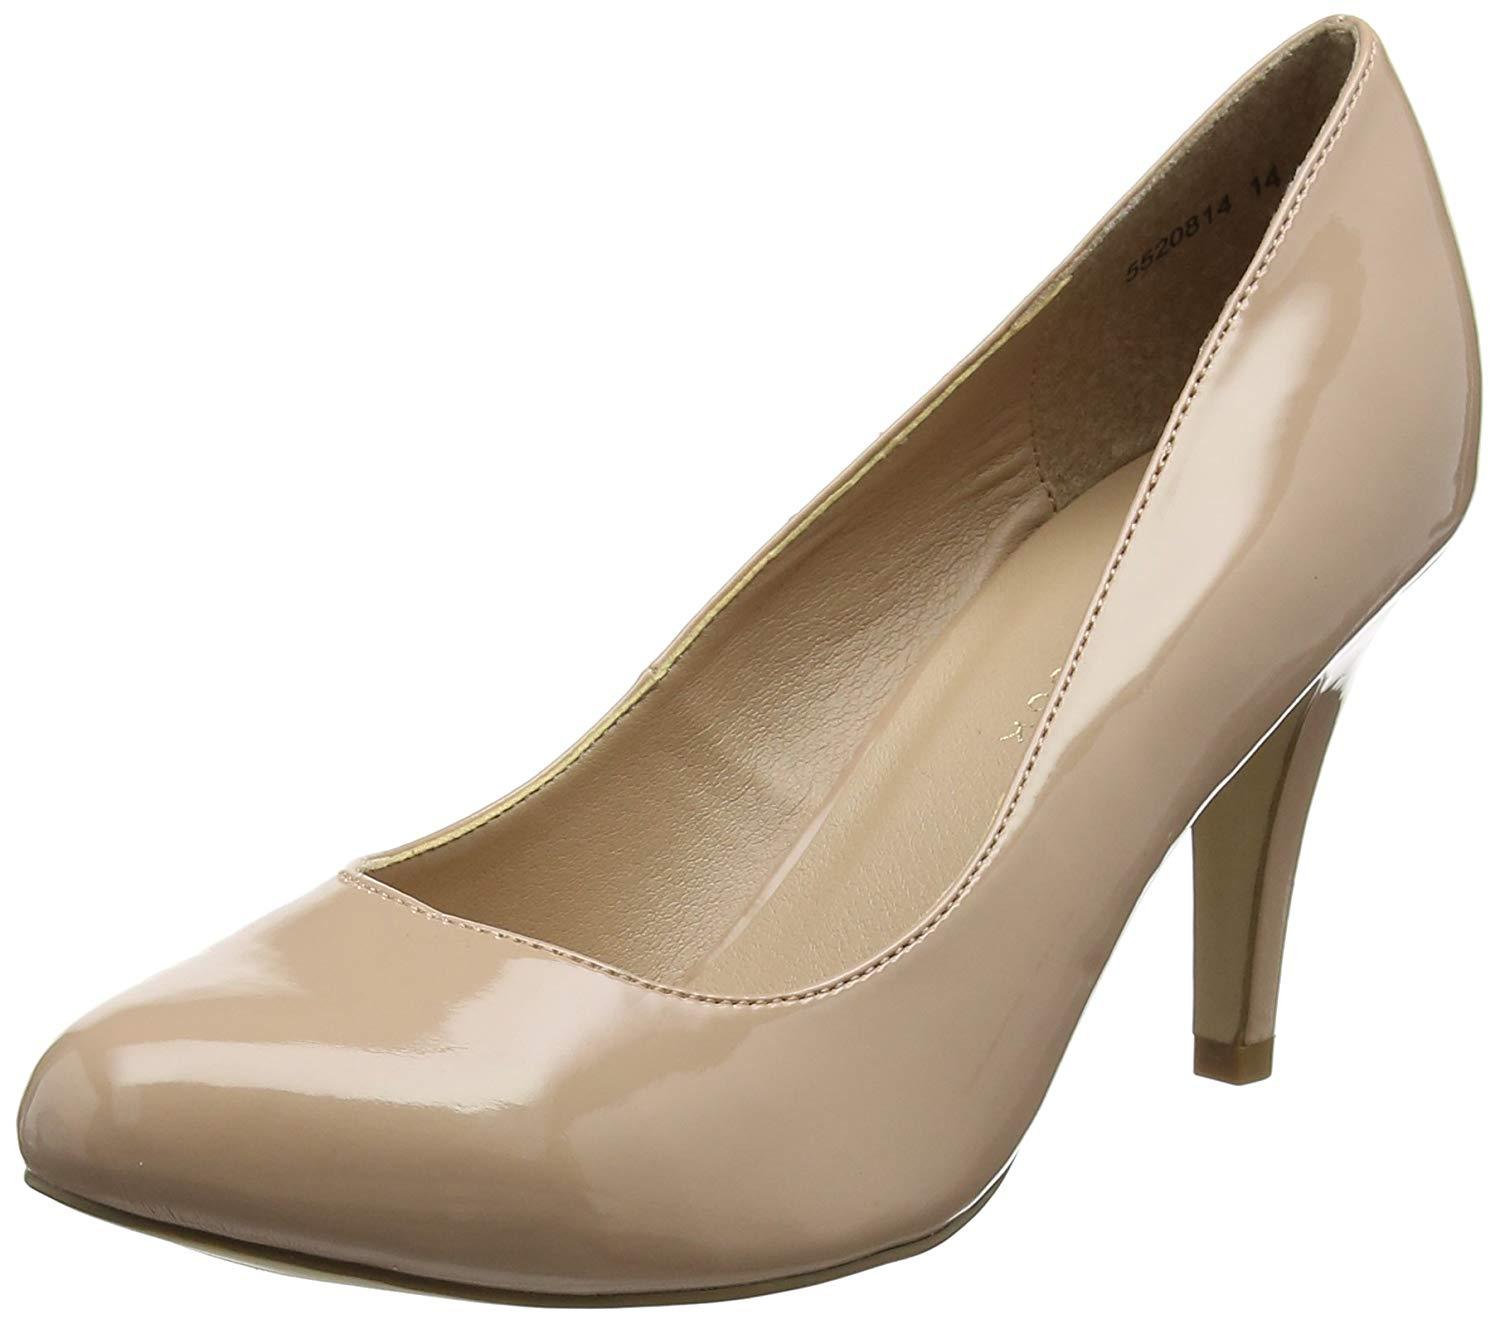 New Look Reanna 2 Womens Closed Toe Heels - Stockpoint Apparel Outlet